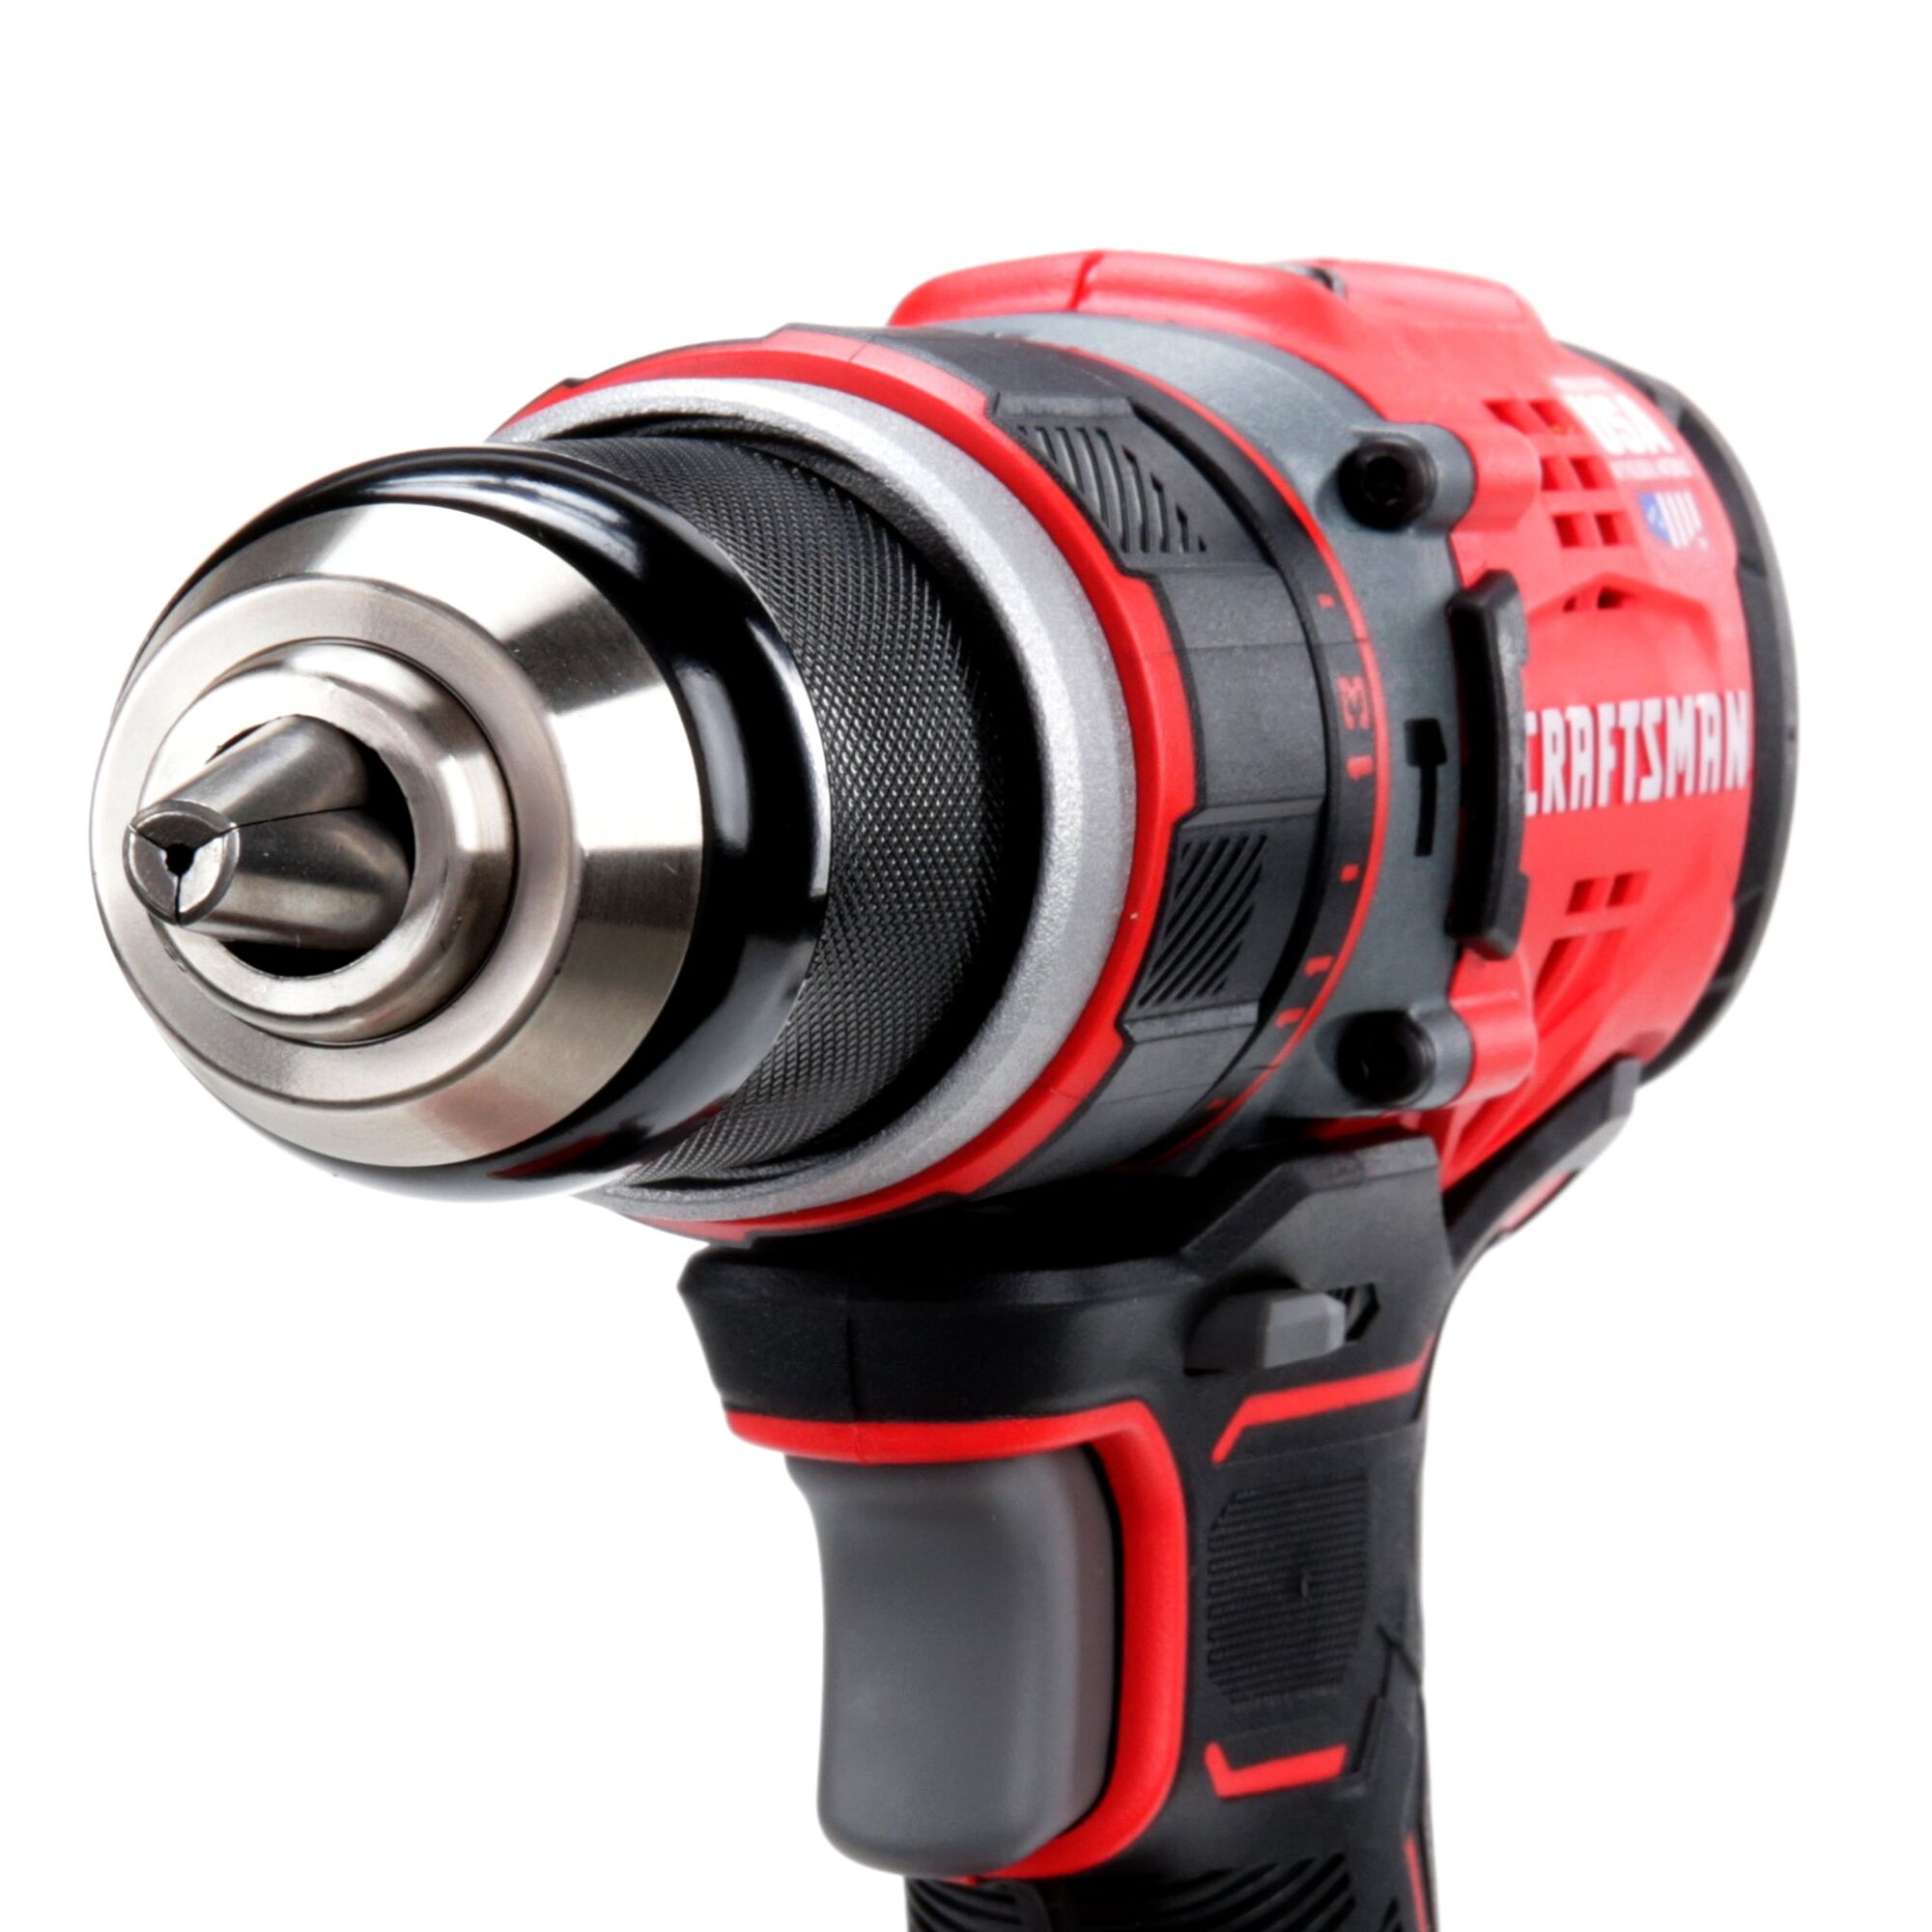 View of CRAFTSMAN Drills: Compact highlighting product features